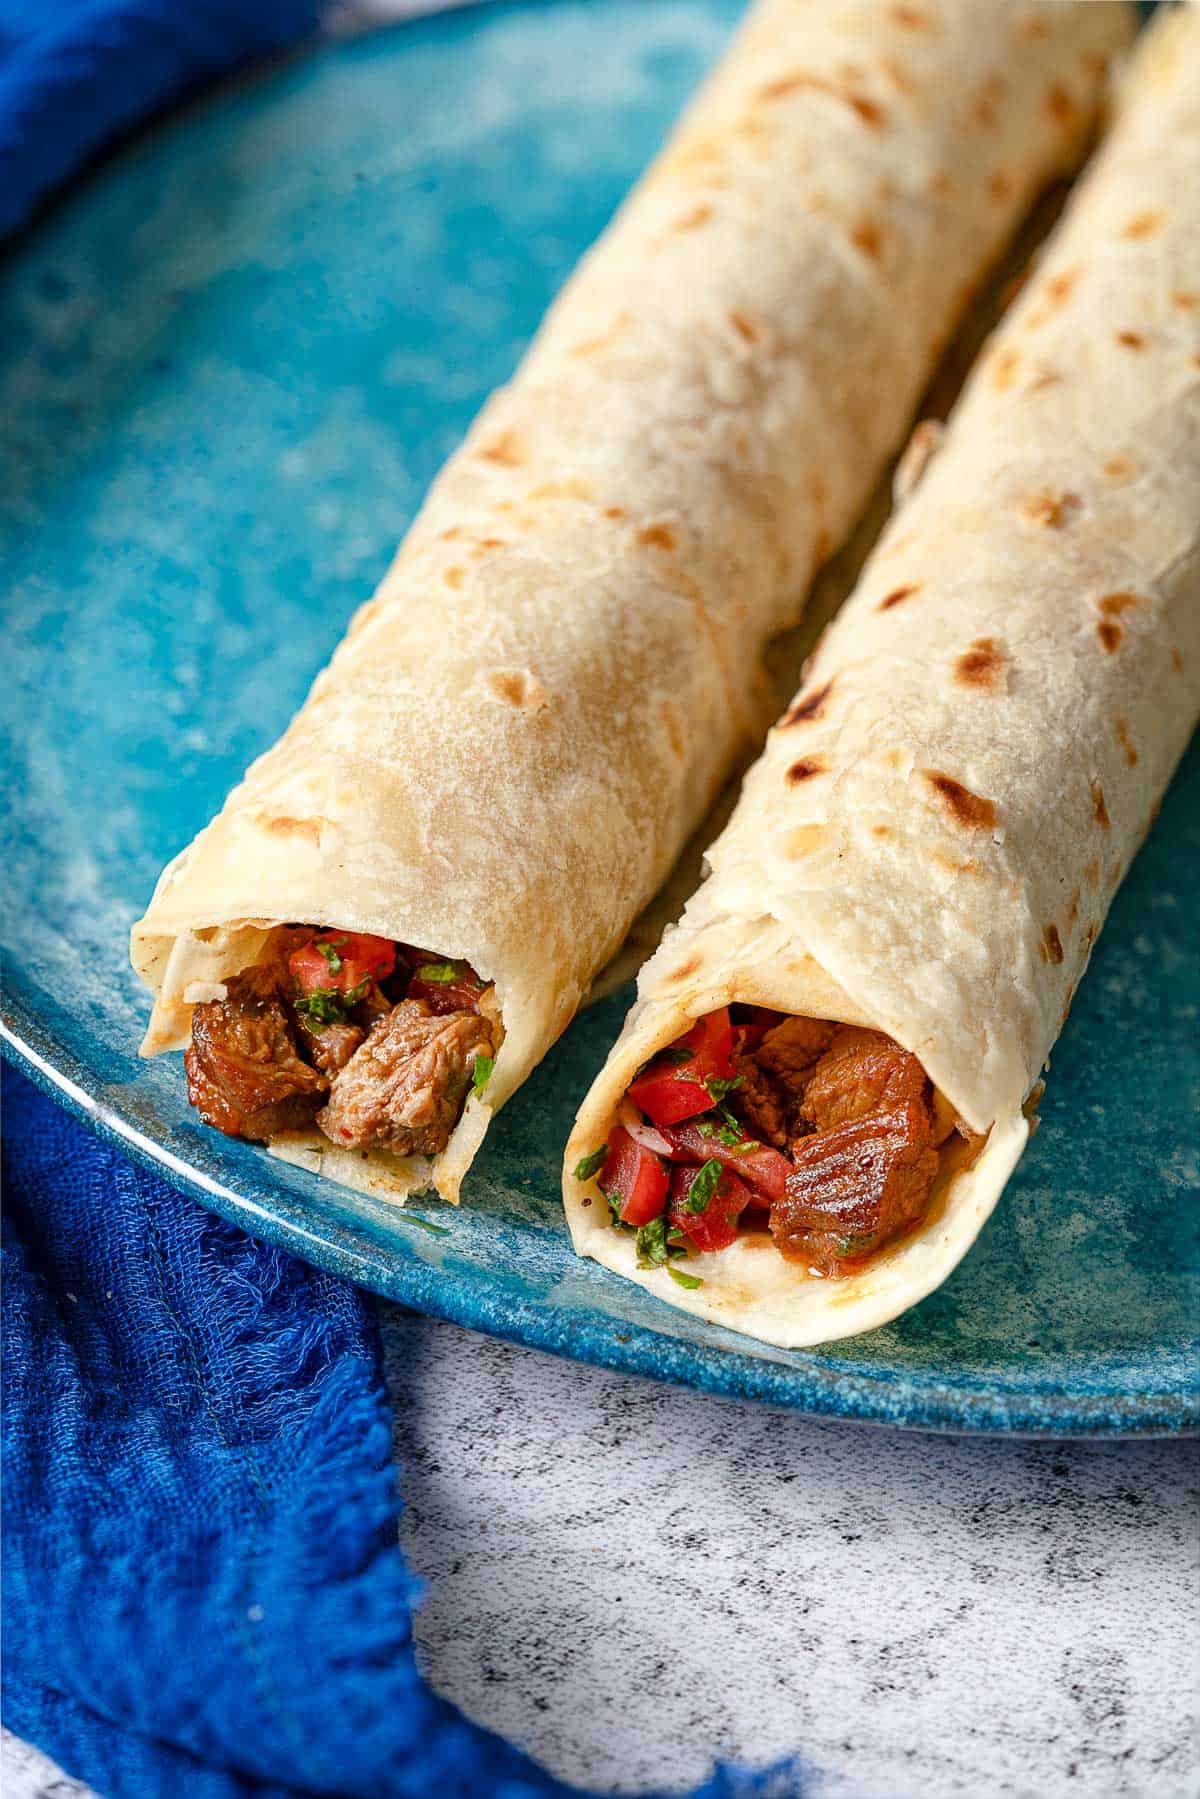 close up shot of the top of two tantuni steak wraps, showing the steak and tomato salad.